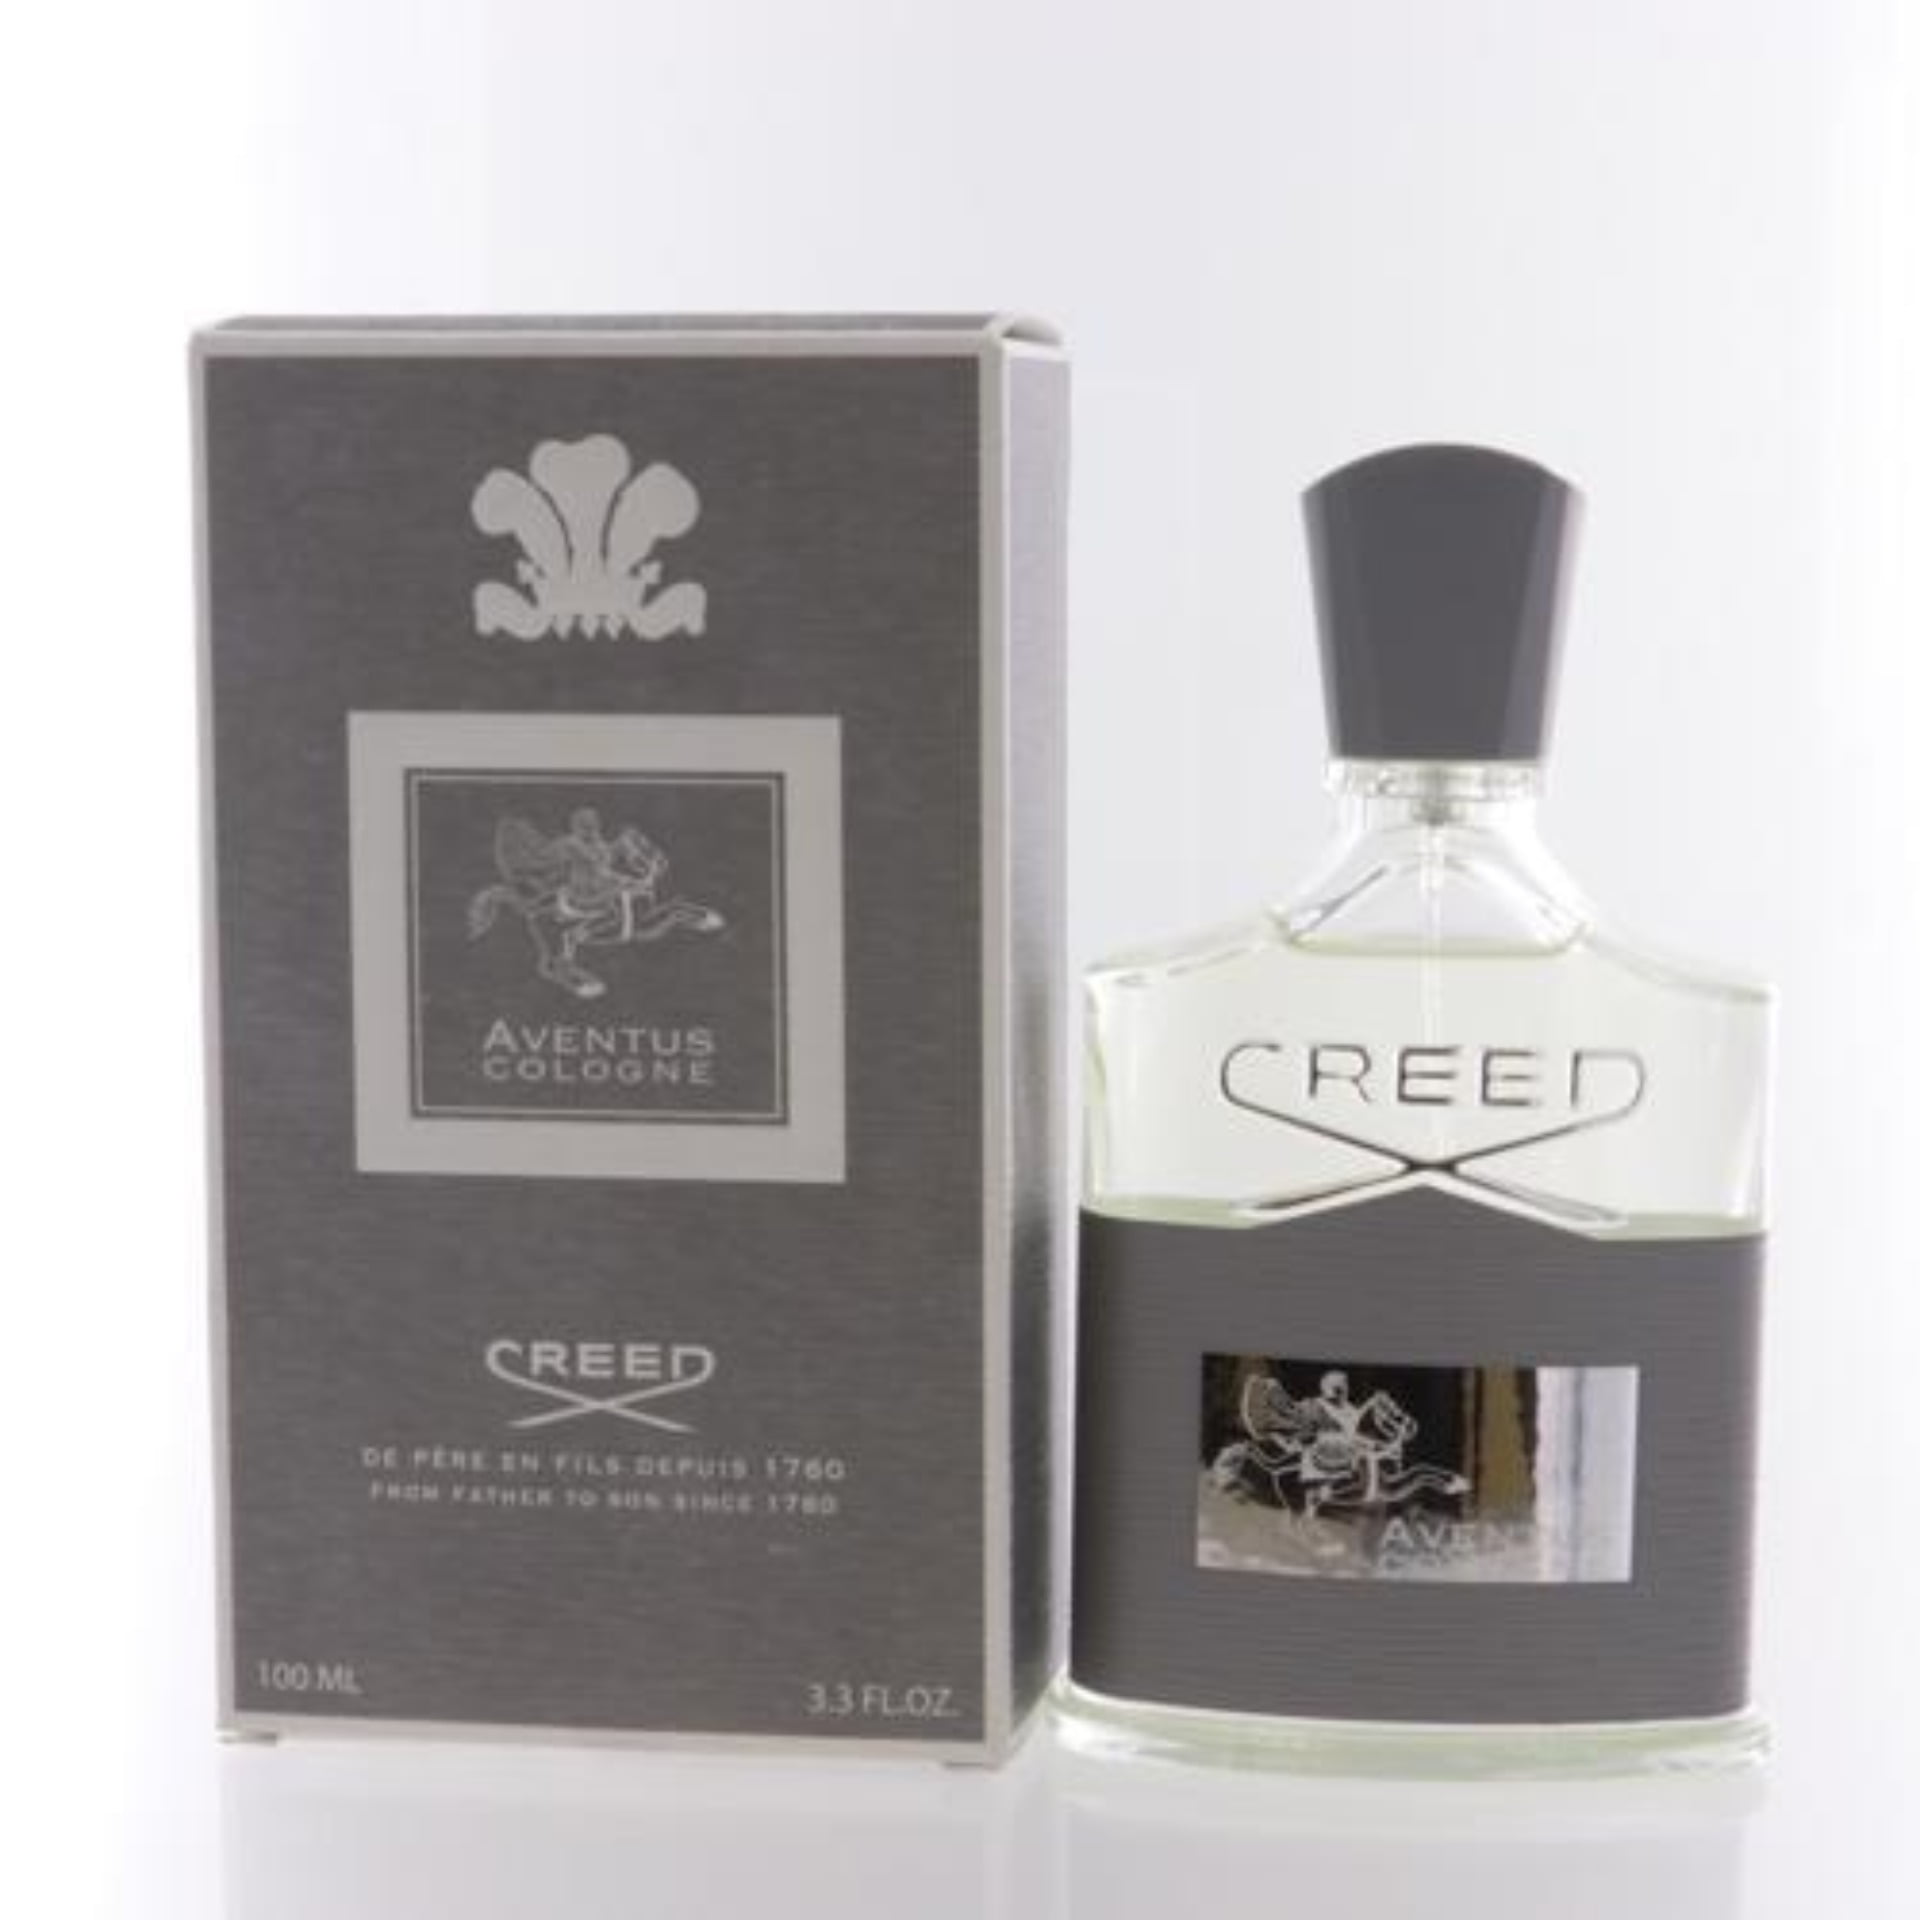 CREED CREED AVENTUS COLOGNE COLOGNE SPRAY 3.3 OZ CREED AVENTUS 